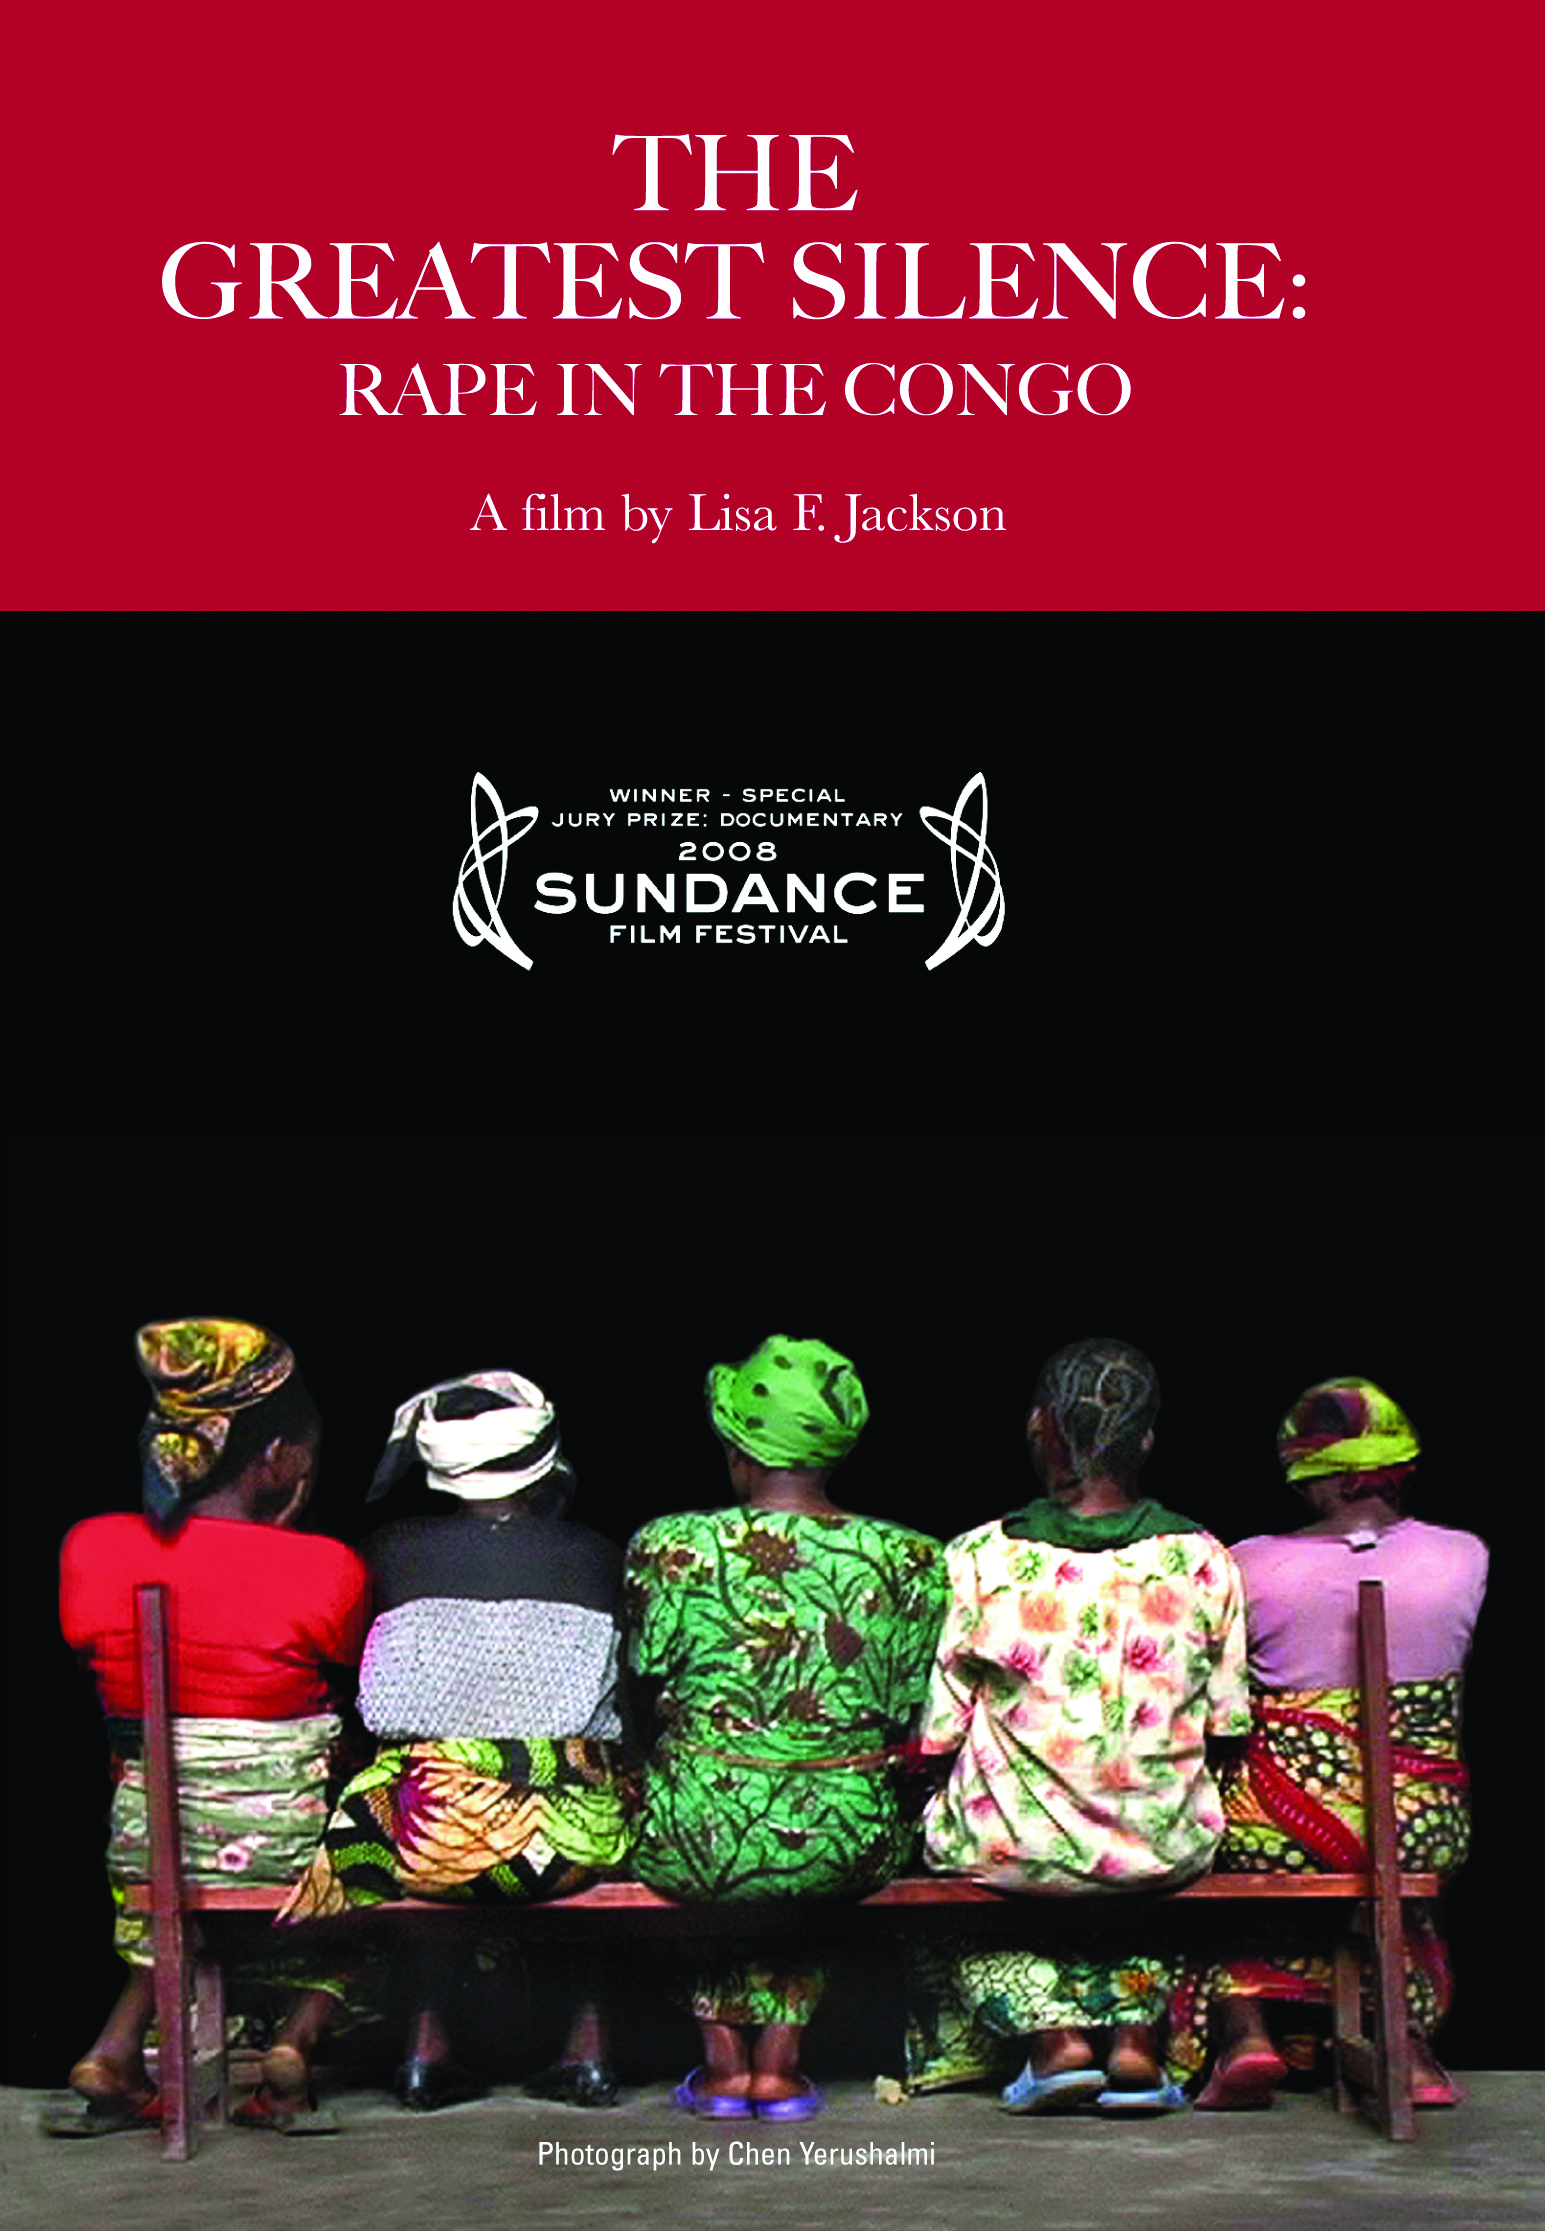 The Greatest Silence: Rape in the Congo | Women Make Movies